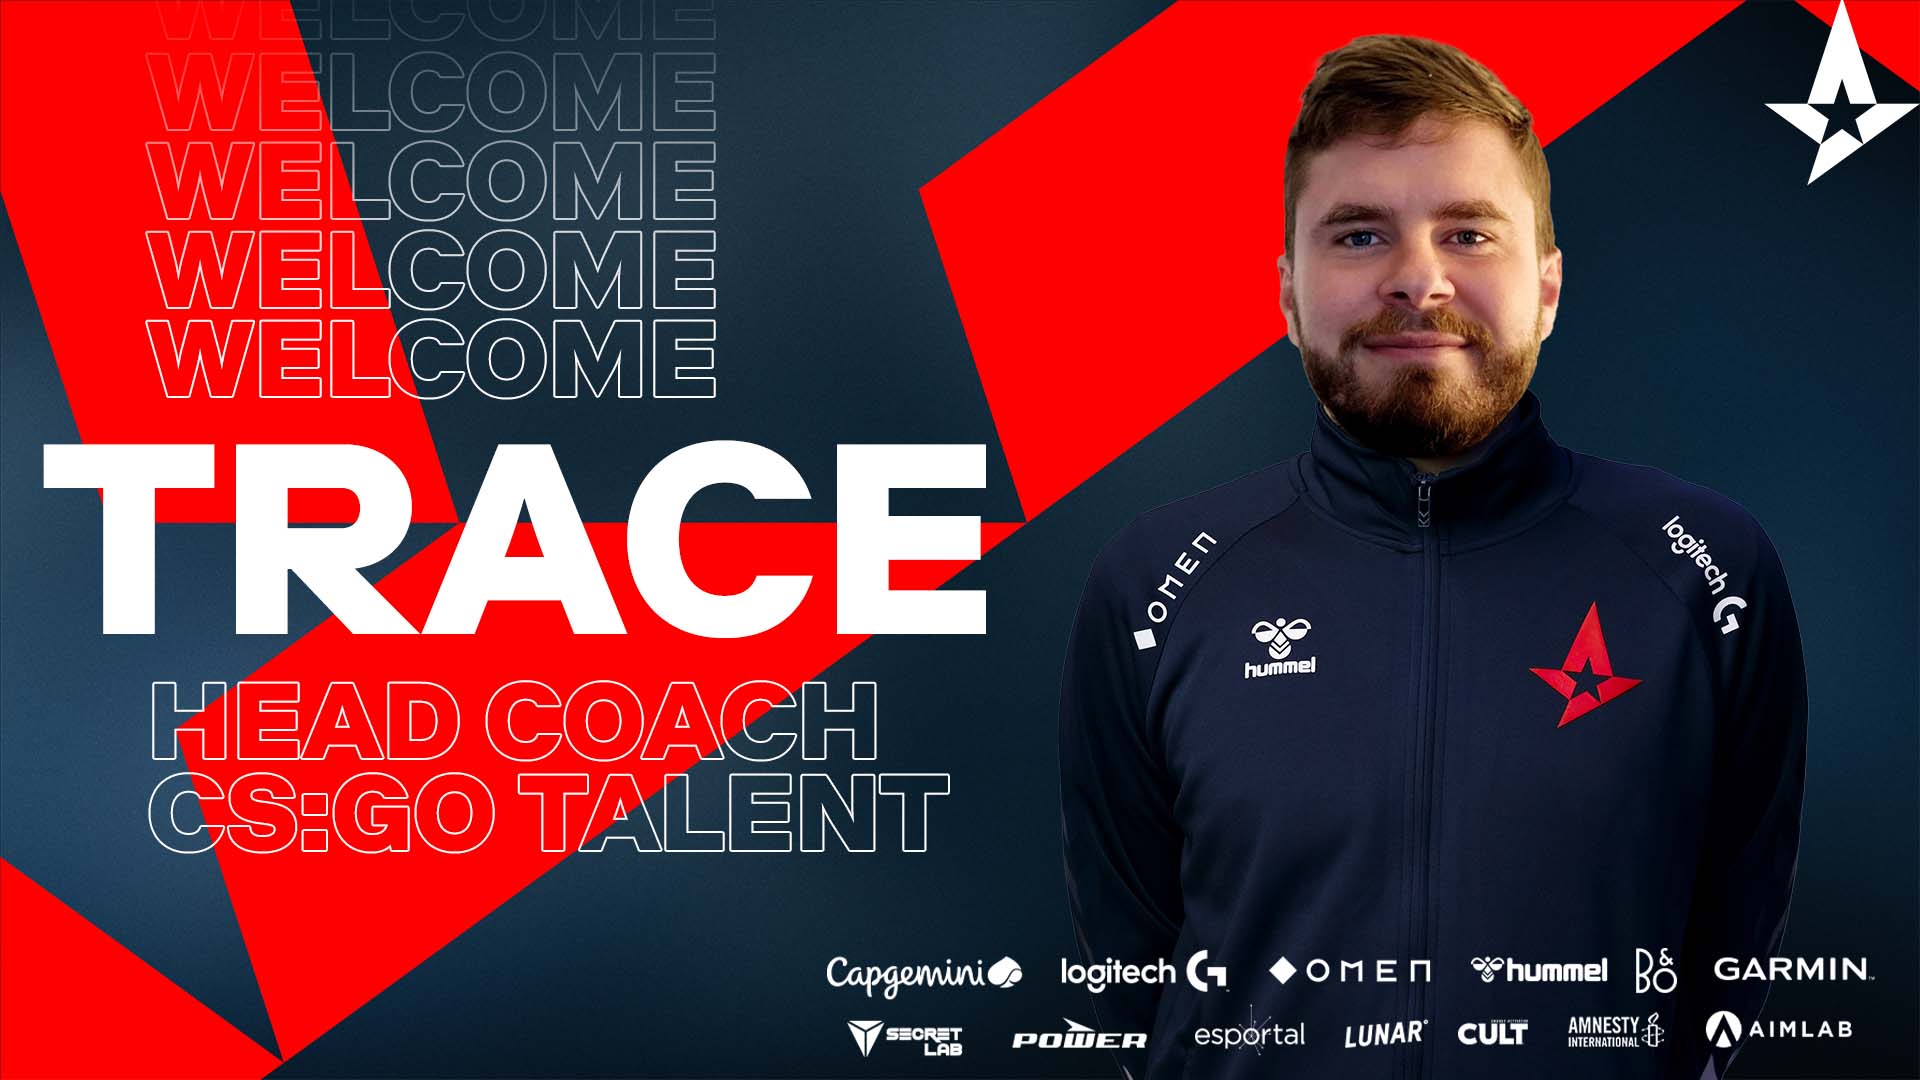 trace takes up Astralis' head coach role